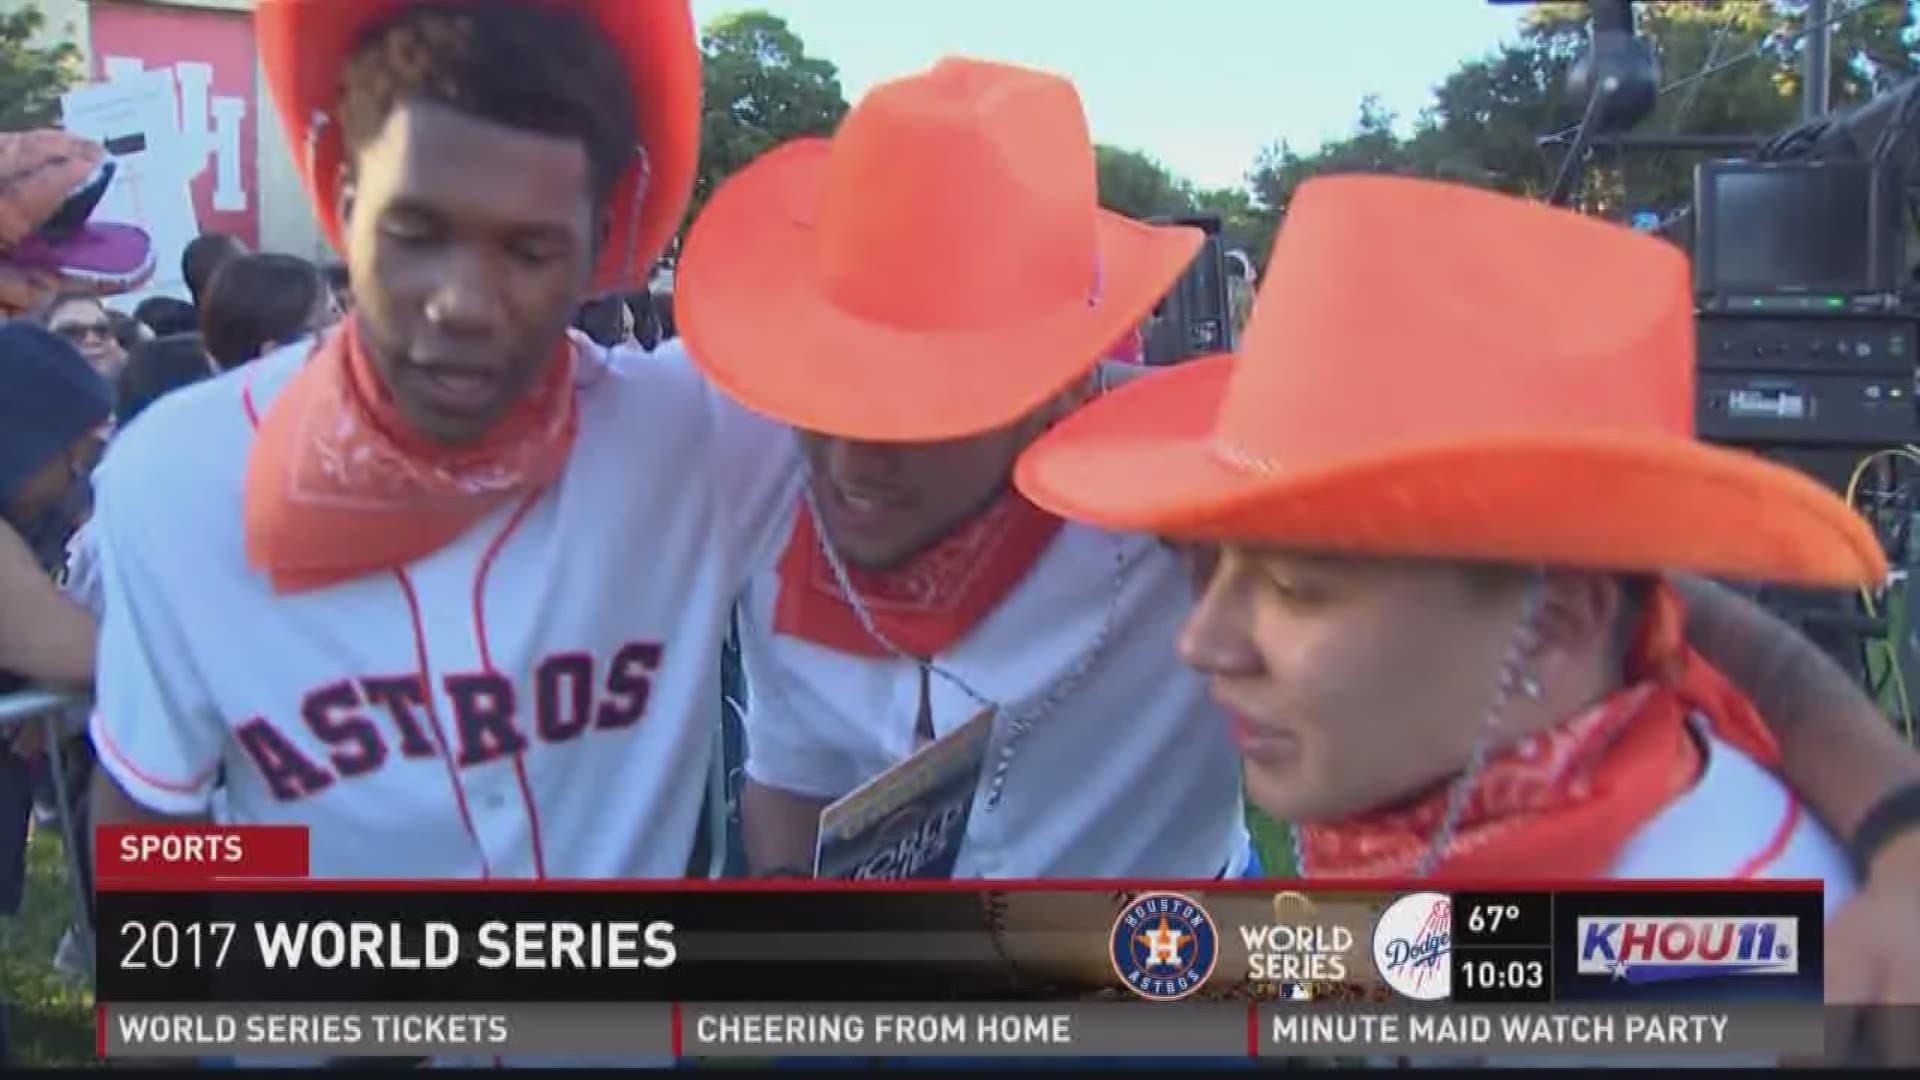 Three incredibly lucky and quick thinking guys are headed to the World Series!